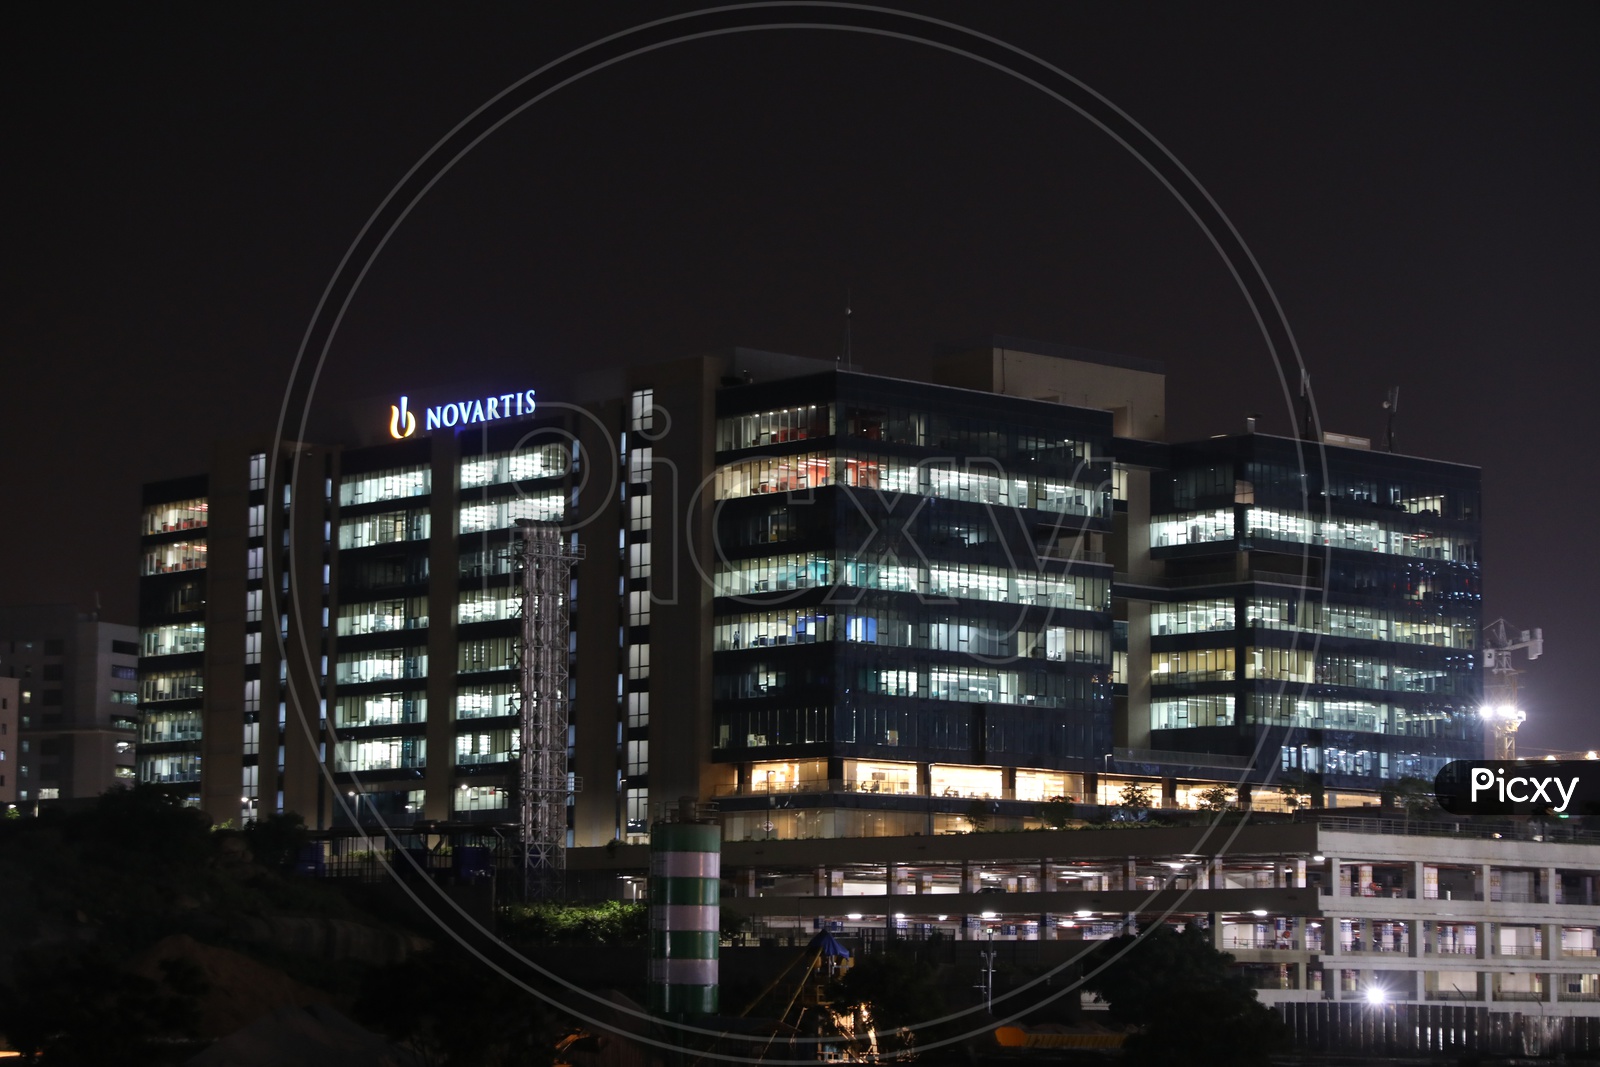 Image Of Novartis Corporate Building Hyderabad Bl107111 Picxy